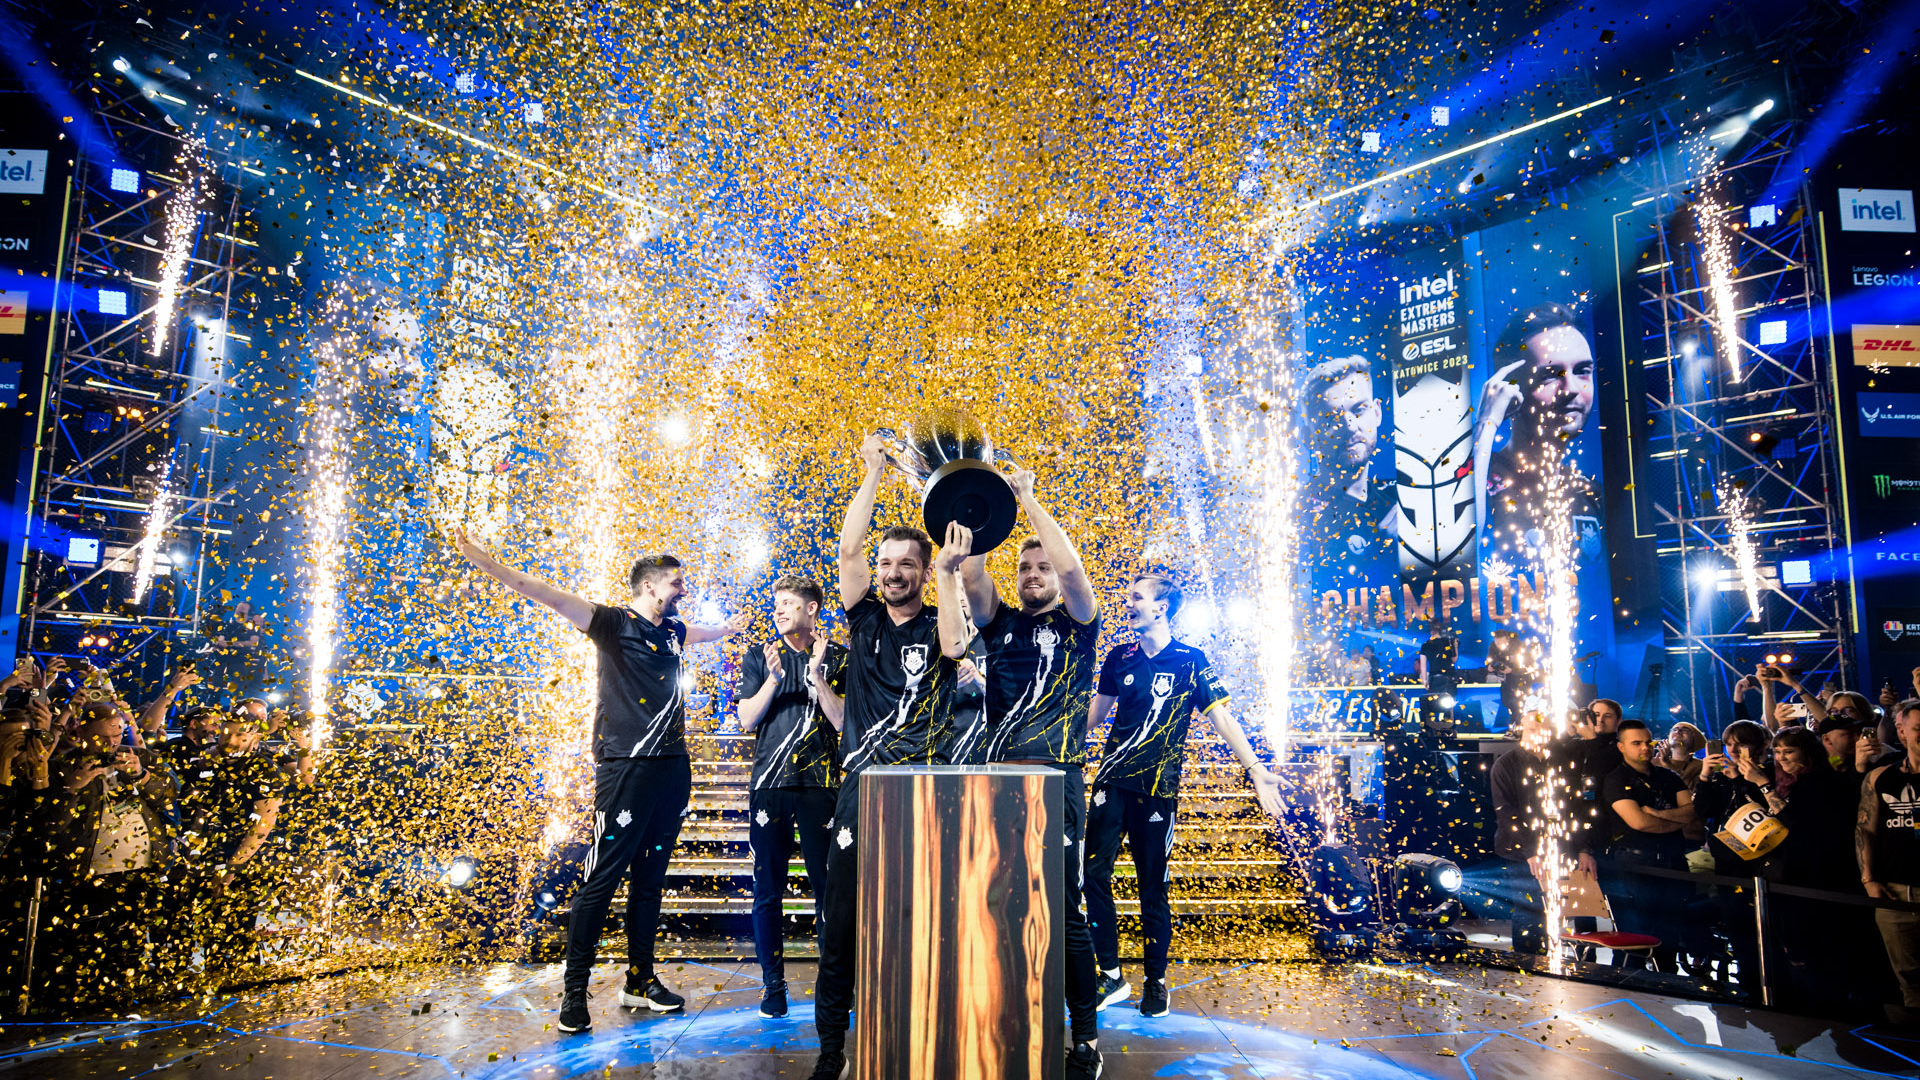 jks officially crowned King of Katowice as G2 claim IEM trophy - Snowball  Esports